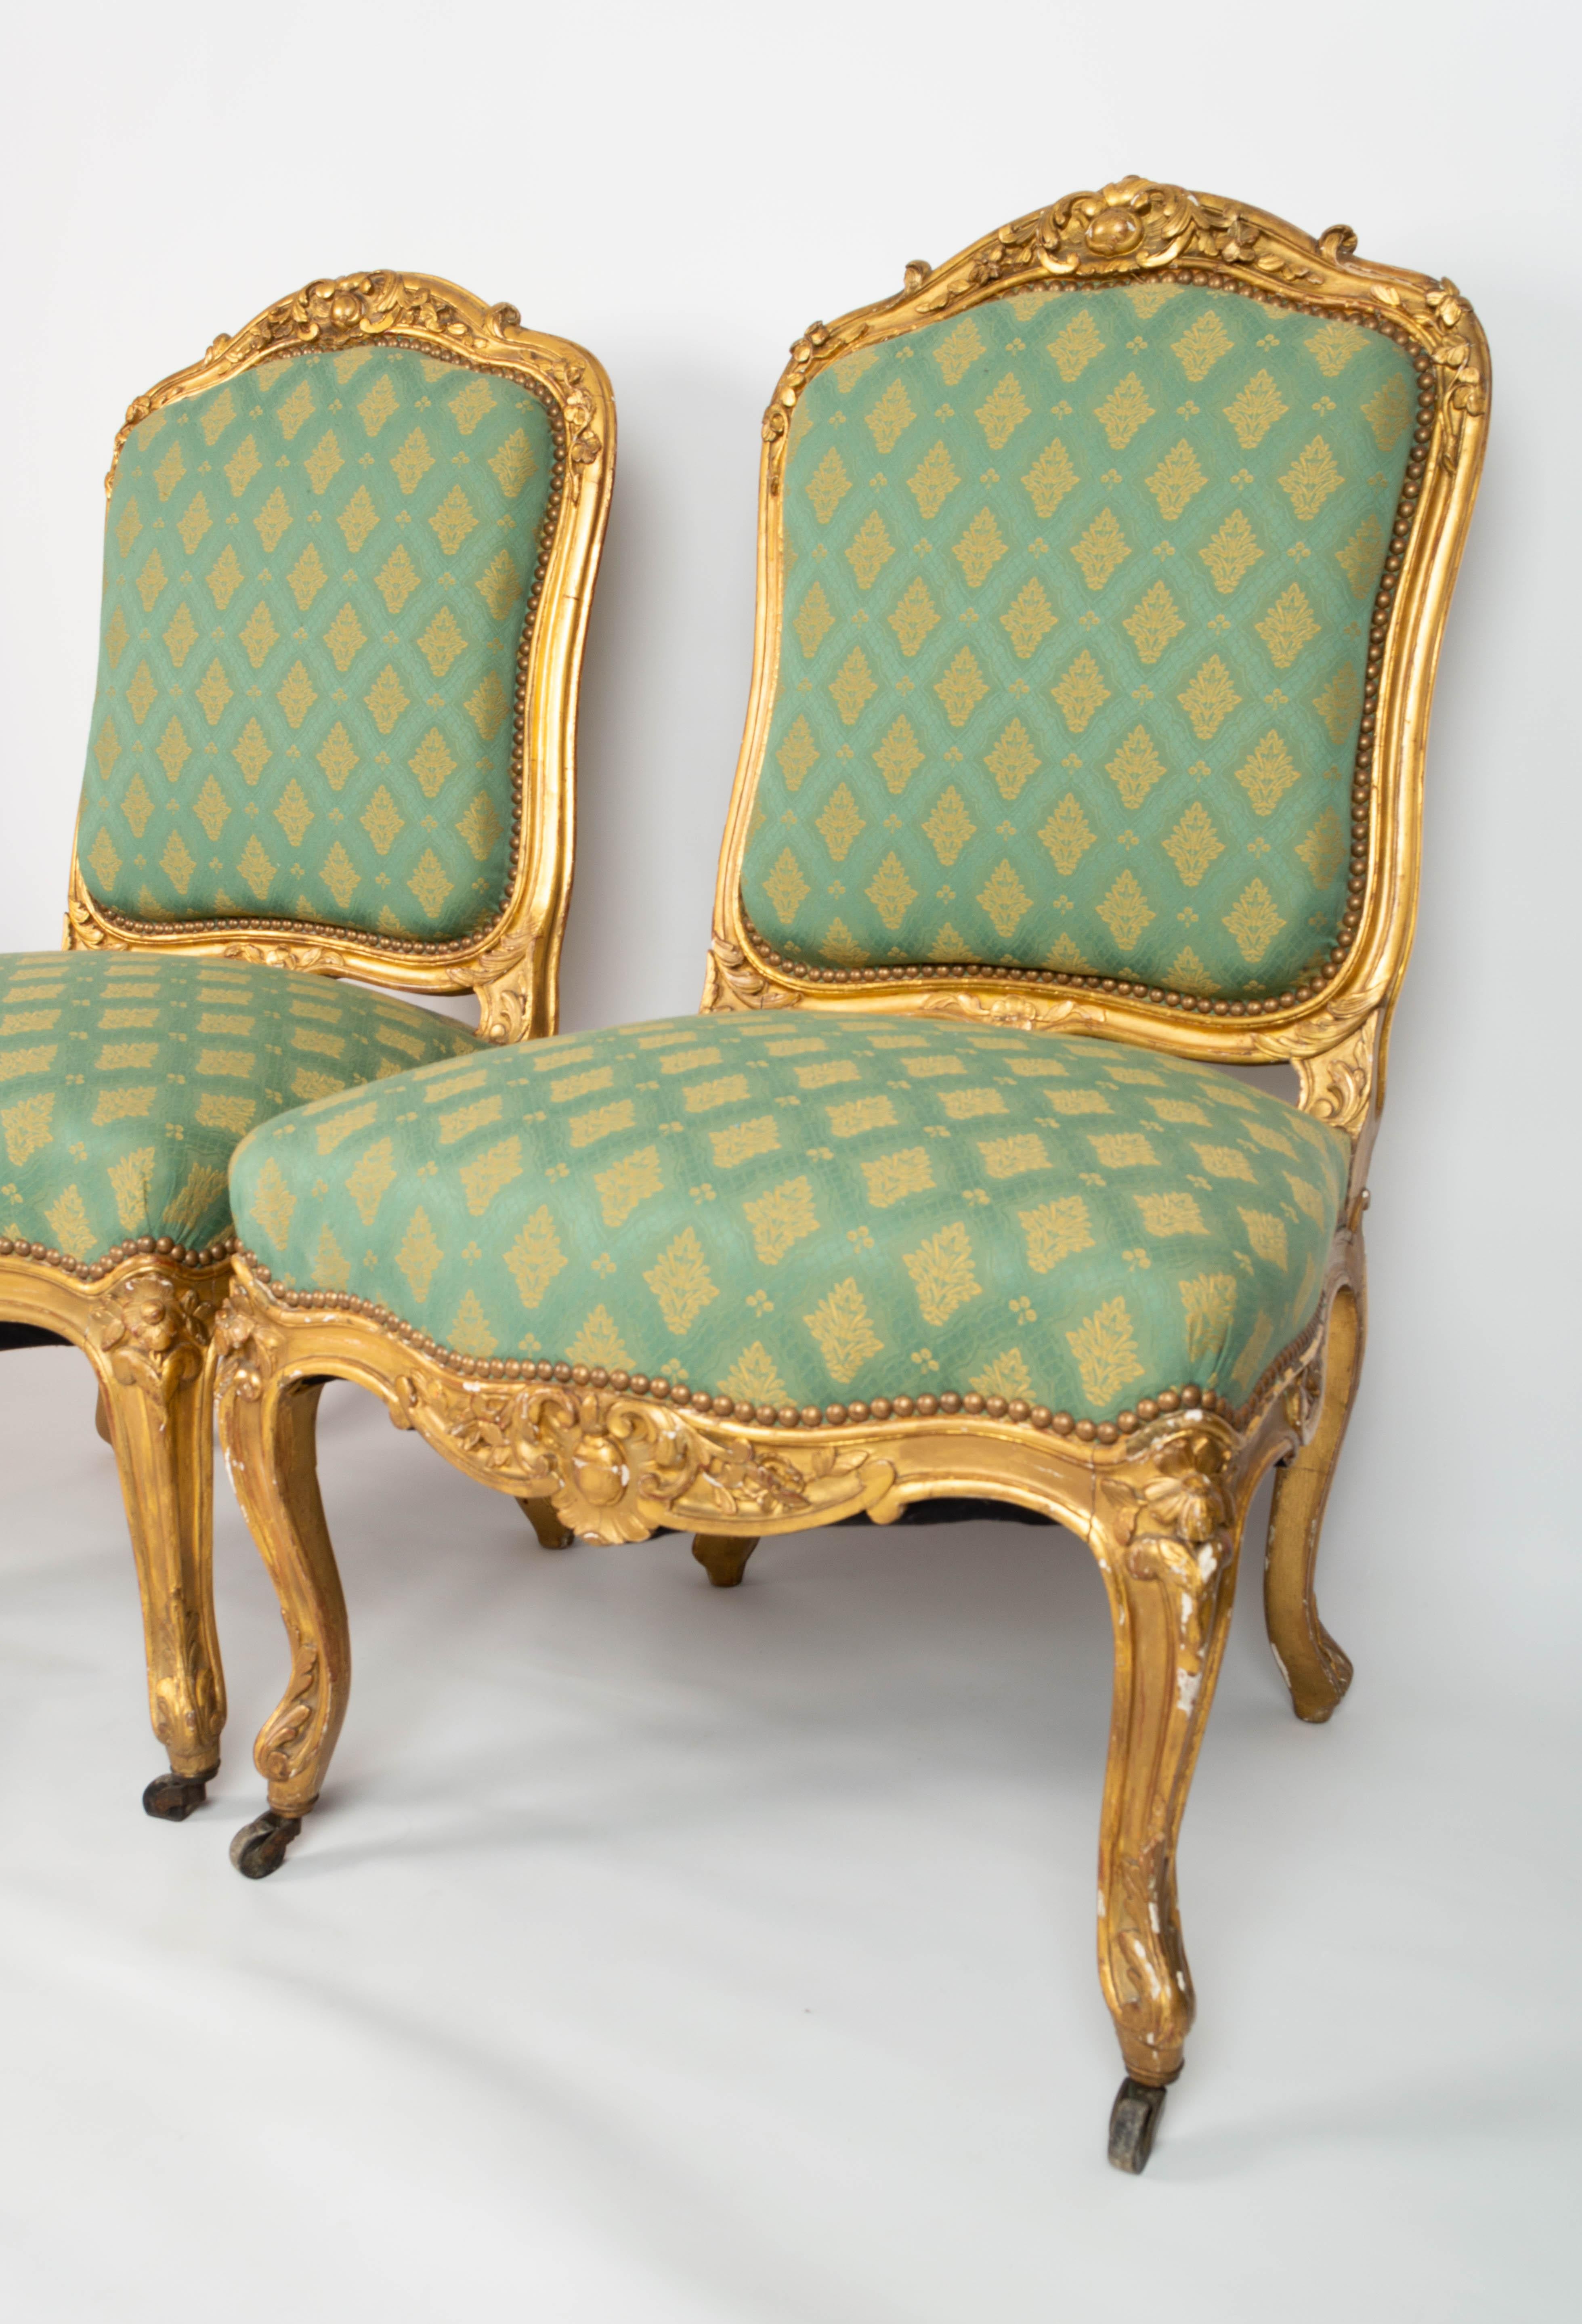 Pair Antique French 19th Century Louis XV Style Giltwood Salon Chairs C.1870 In Good Condition For Sale In London, GB